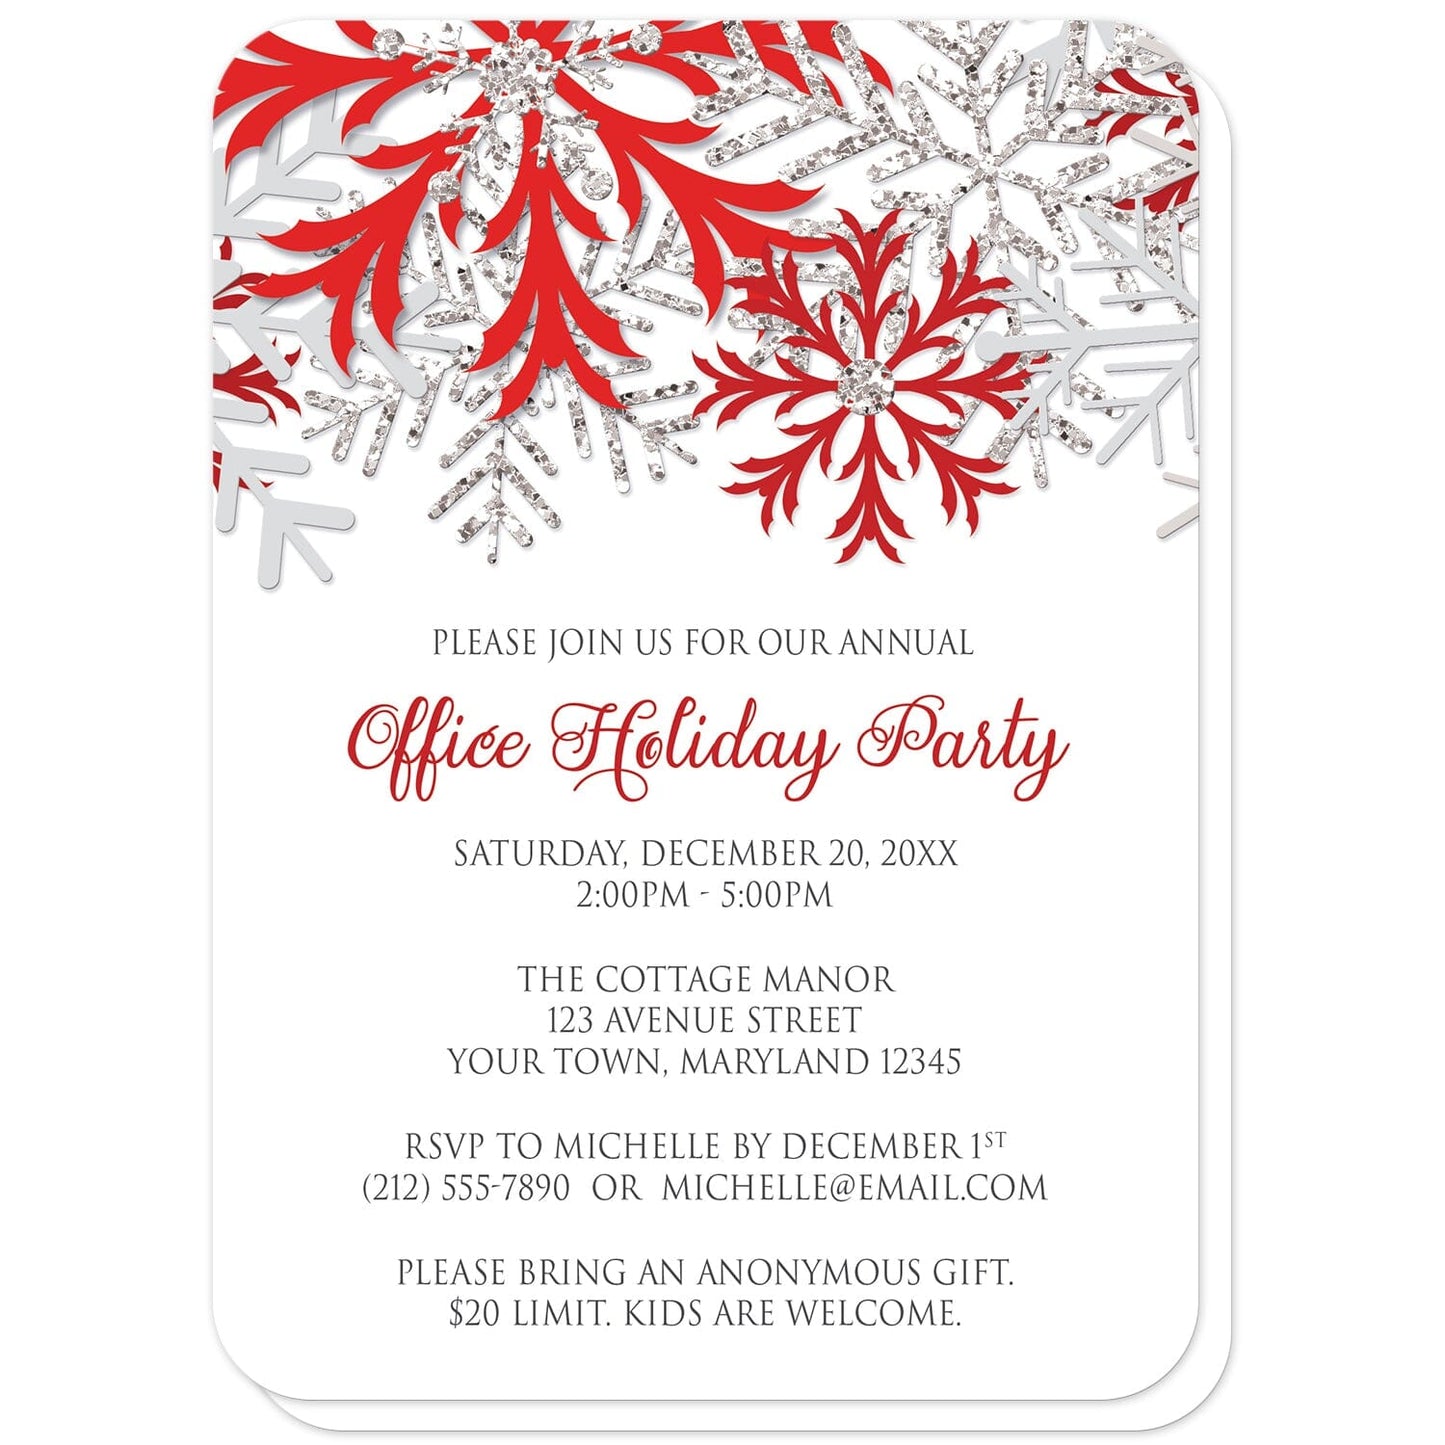 Winter Red Silver Snowflake Holiday Party Invitations (with rounded corners) at Artistically Invited. Winter red silver snowflake holiday party invitations with red, darker red, and silver-colored glitter-illustrated snowflakes over a white background. Your personalized party details for your home or office party are custom printed in gray and red. The occasion title is printed in a whimsical red script font while your remaining details are printed in an all-capital letters gray serif font.